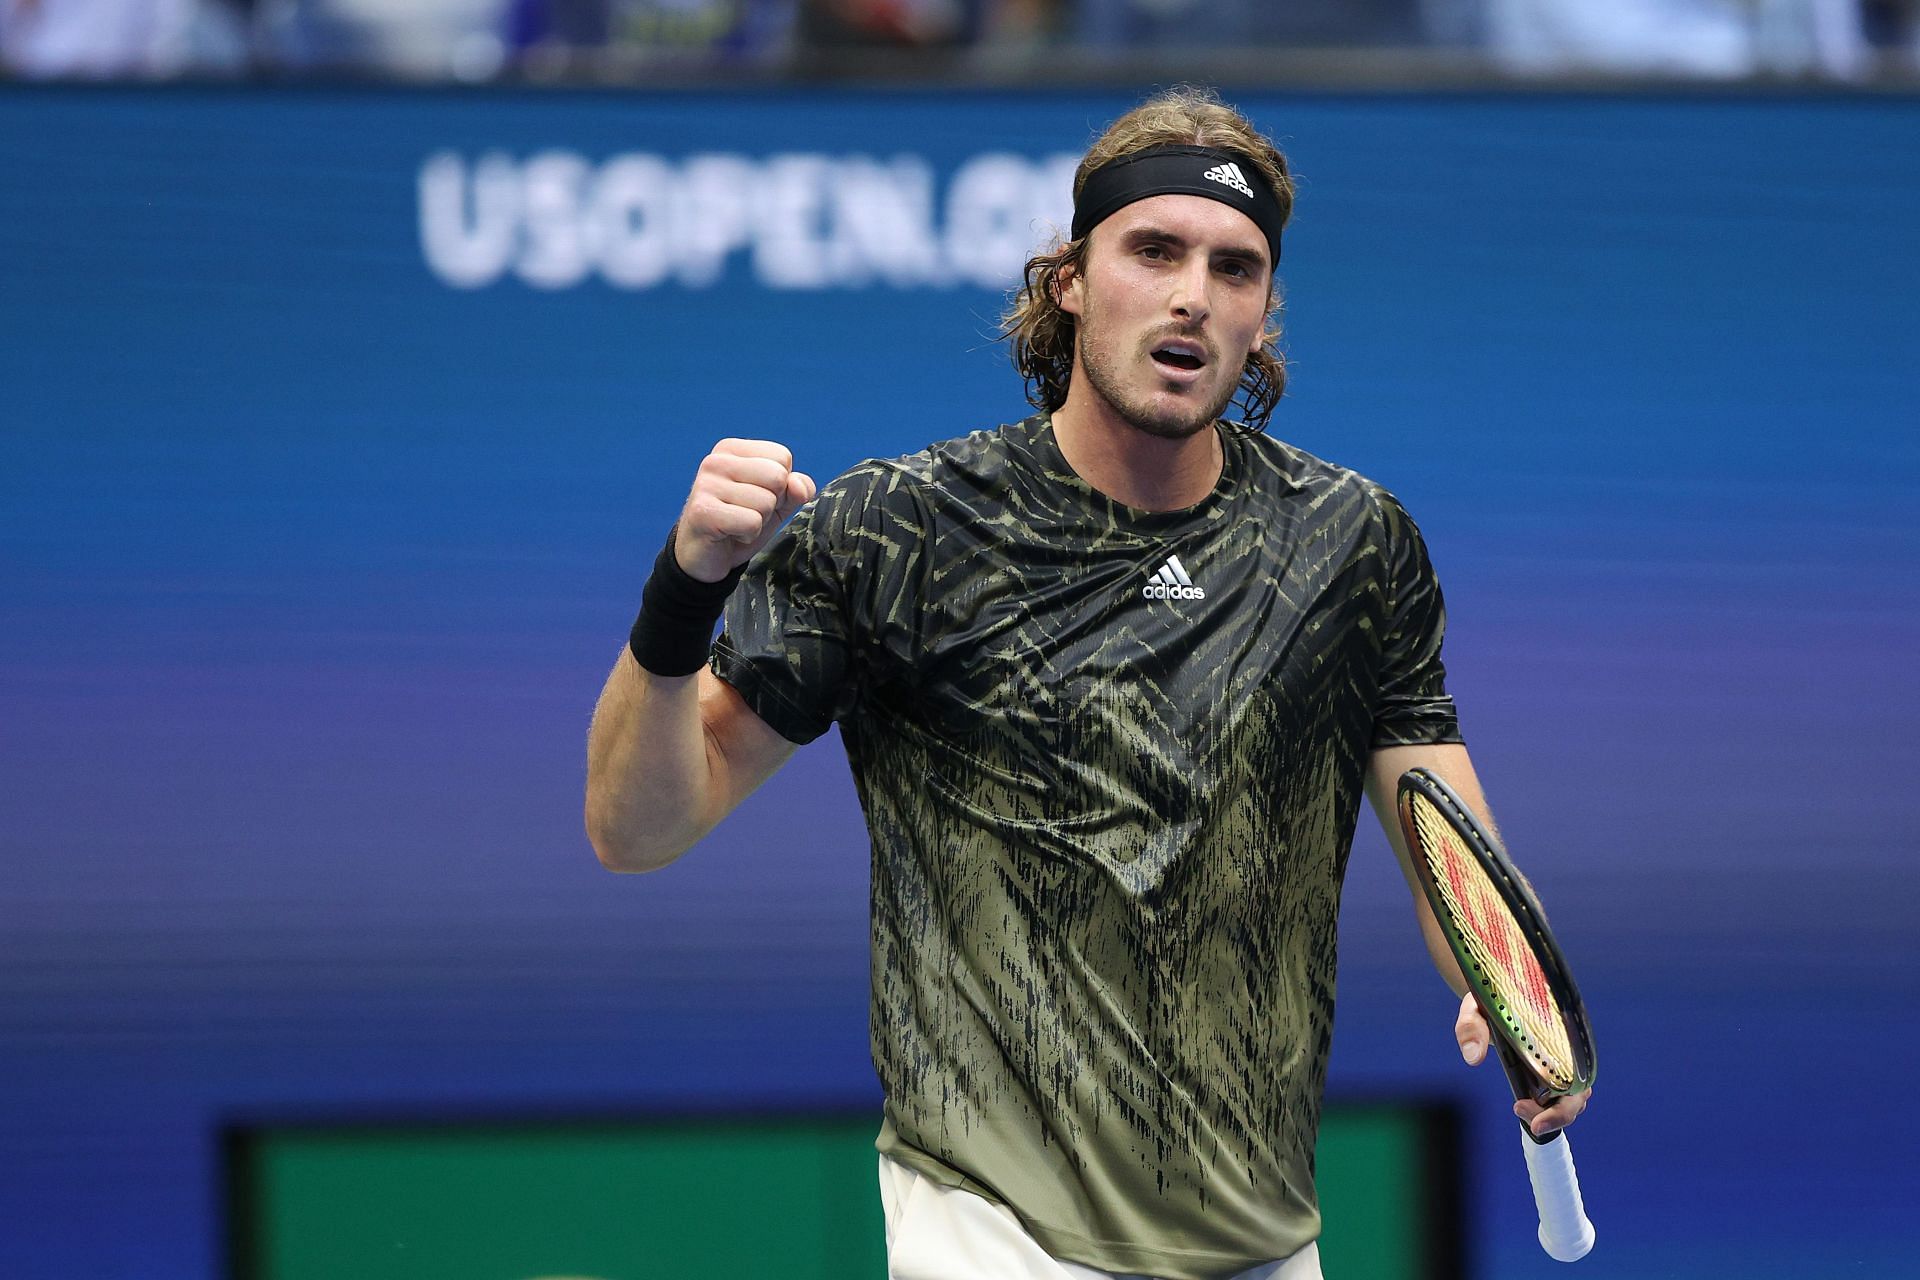 Los Cabos Open 2023 Stefanos Tsitsipas vs John Isner preview, head-to-head, prediction, odds, and pick